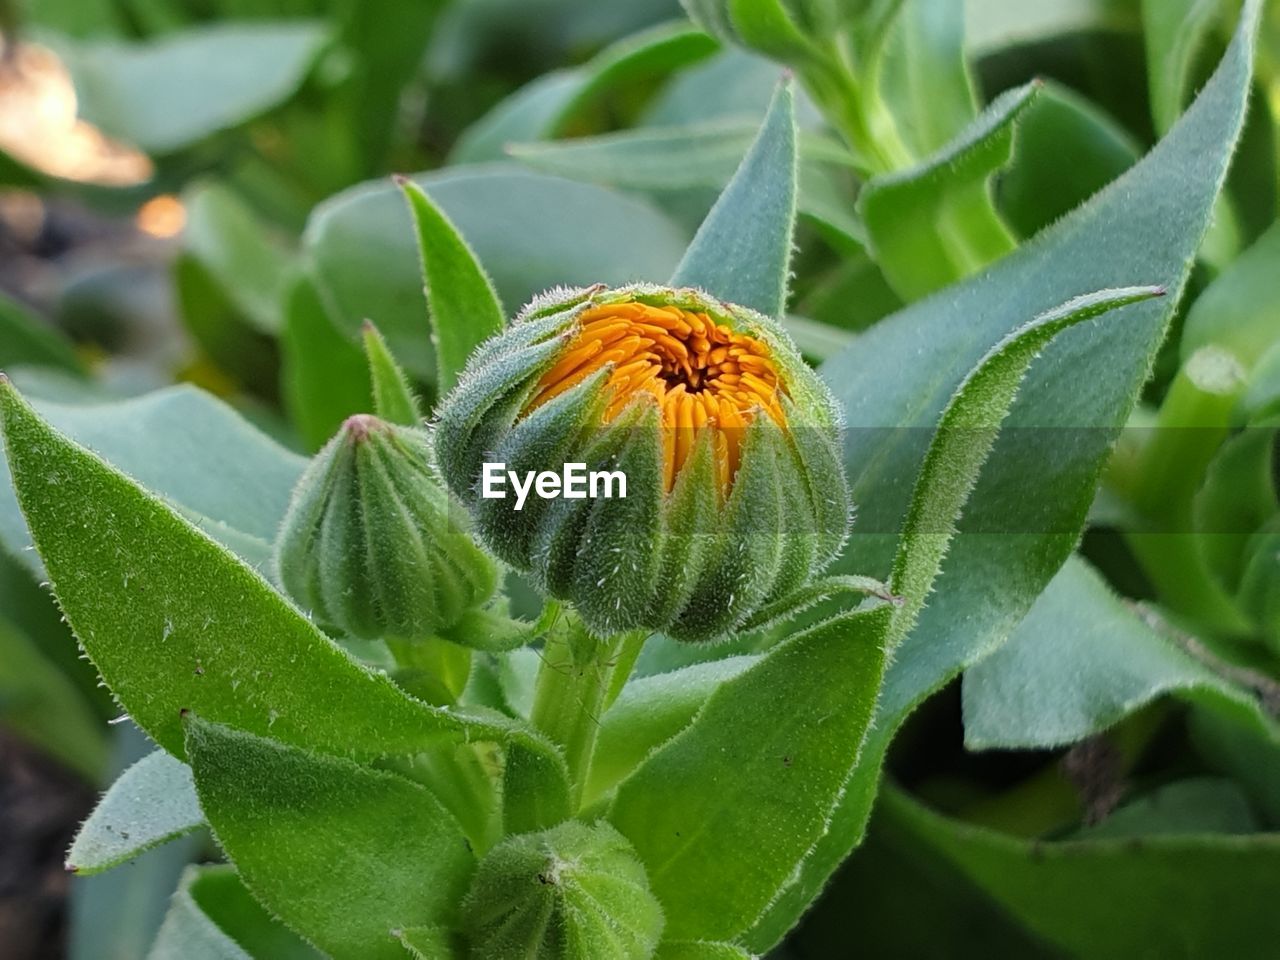 Close-up of flowering plant / marigold